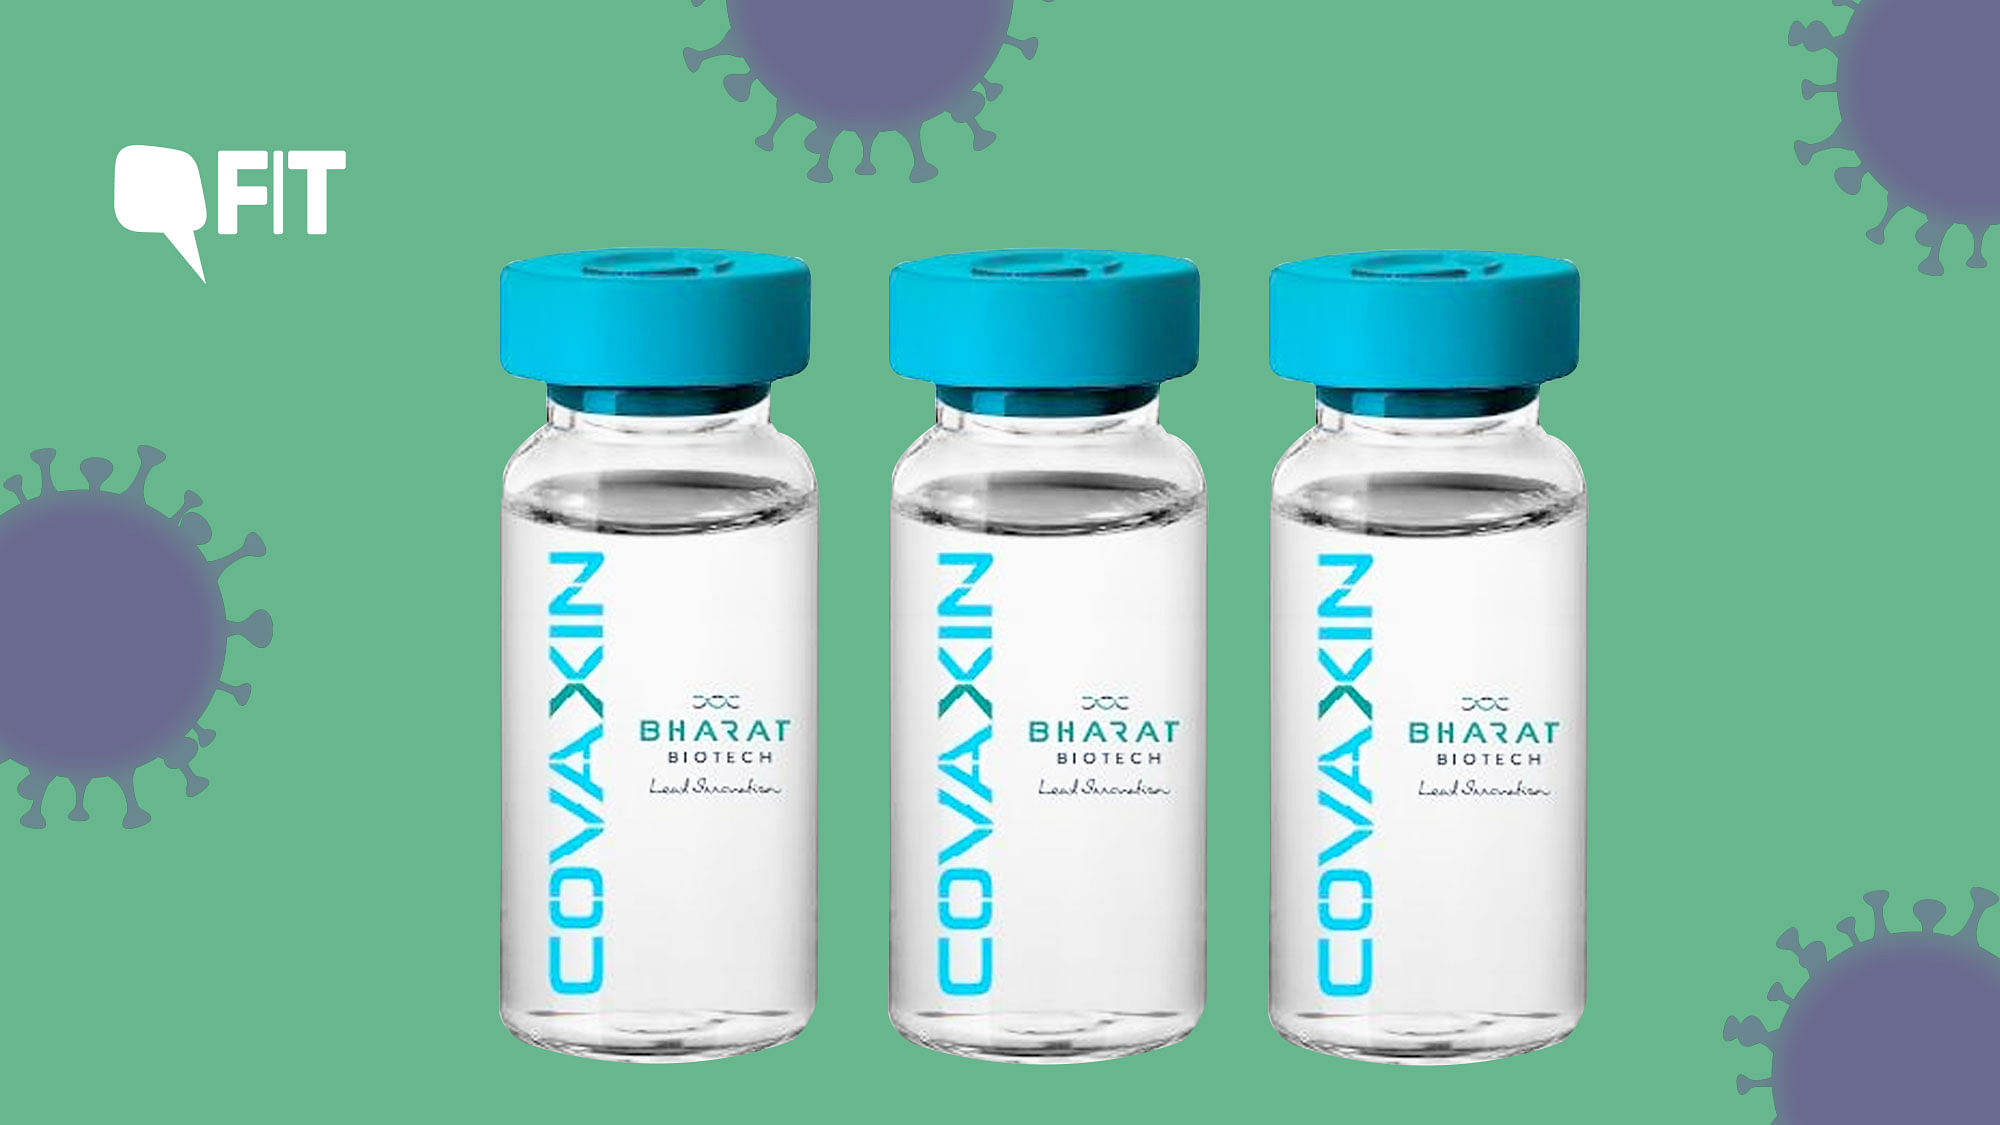 The human trials of Covaxin will start across India from July 2020.